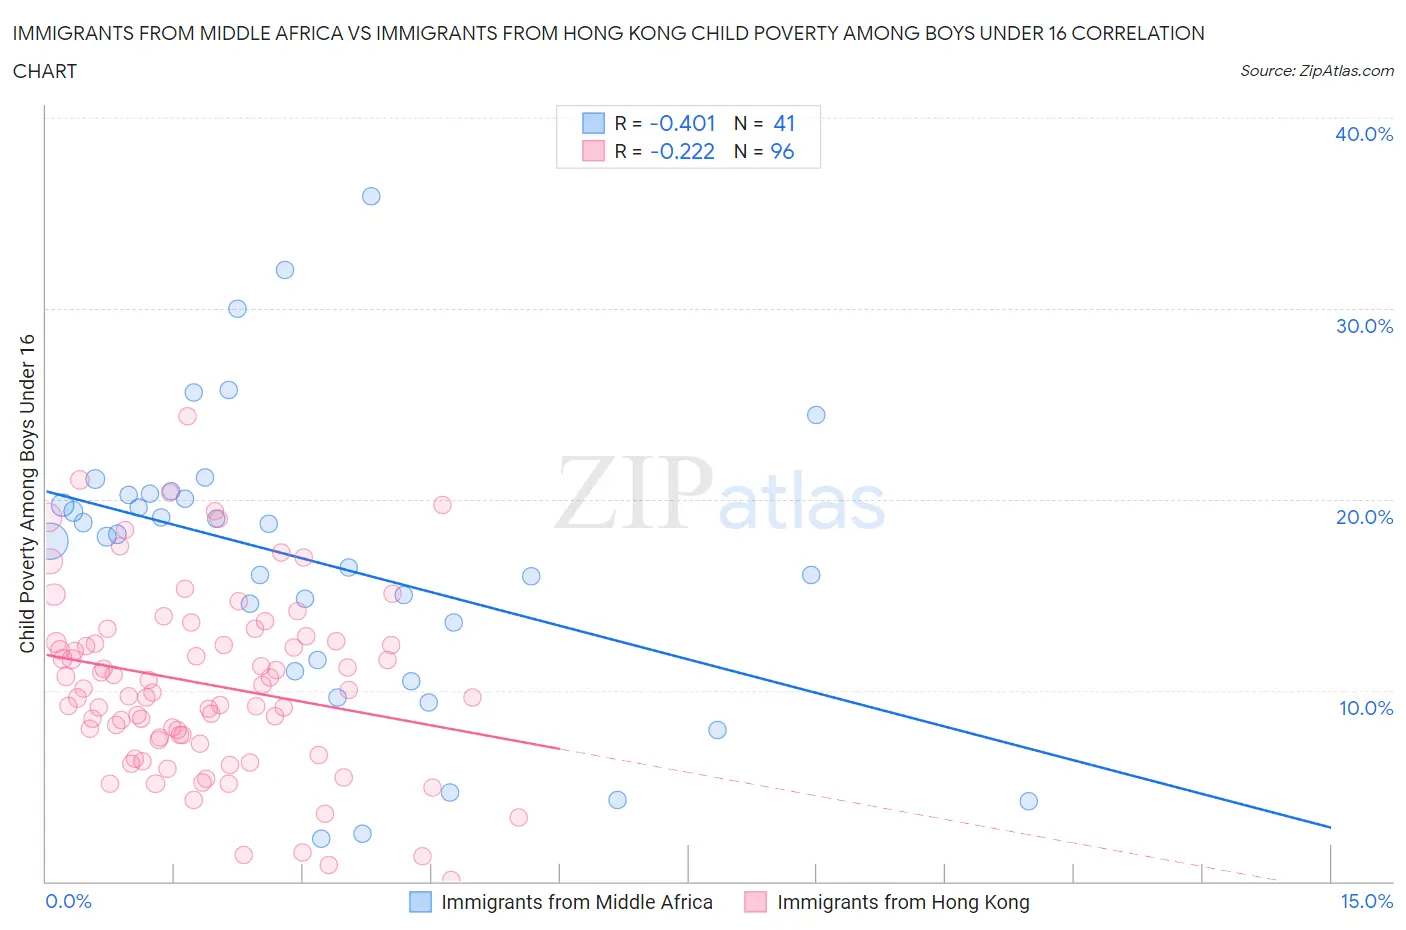 Immigrants from Middle Africa vs Immigrants from Hong Kong Child Poverty Among Boys Under 16